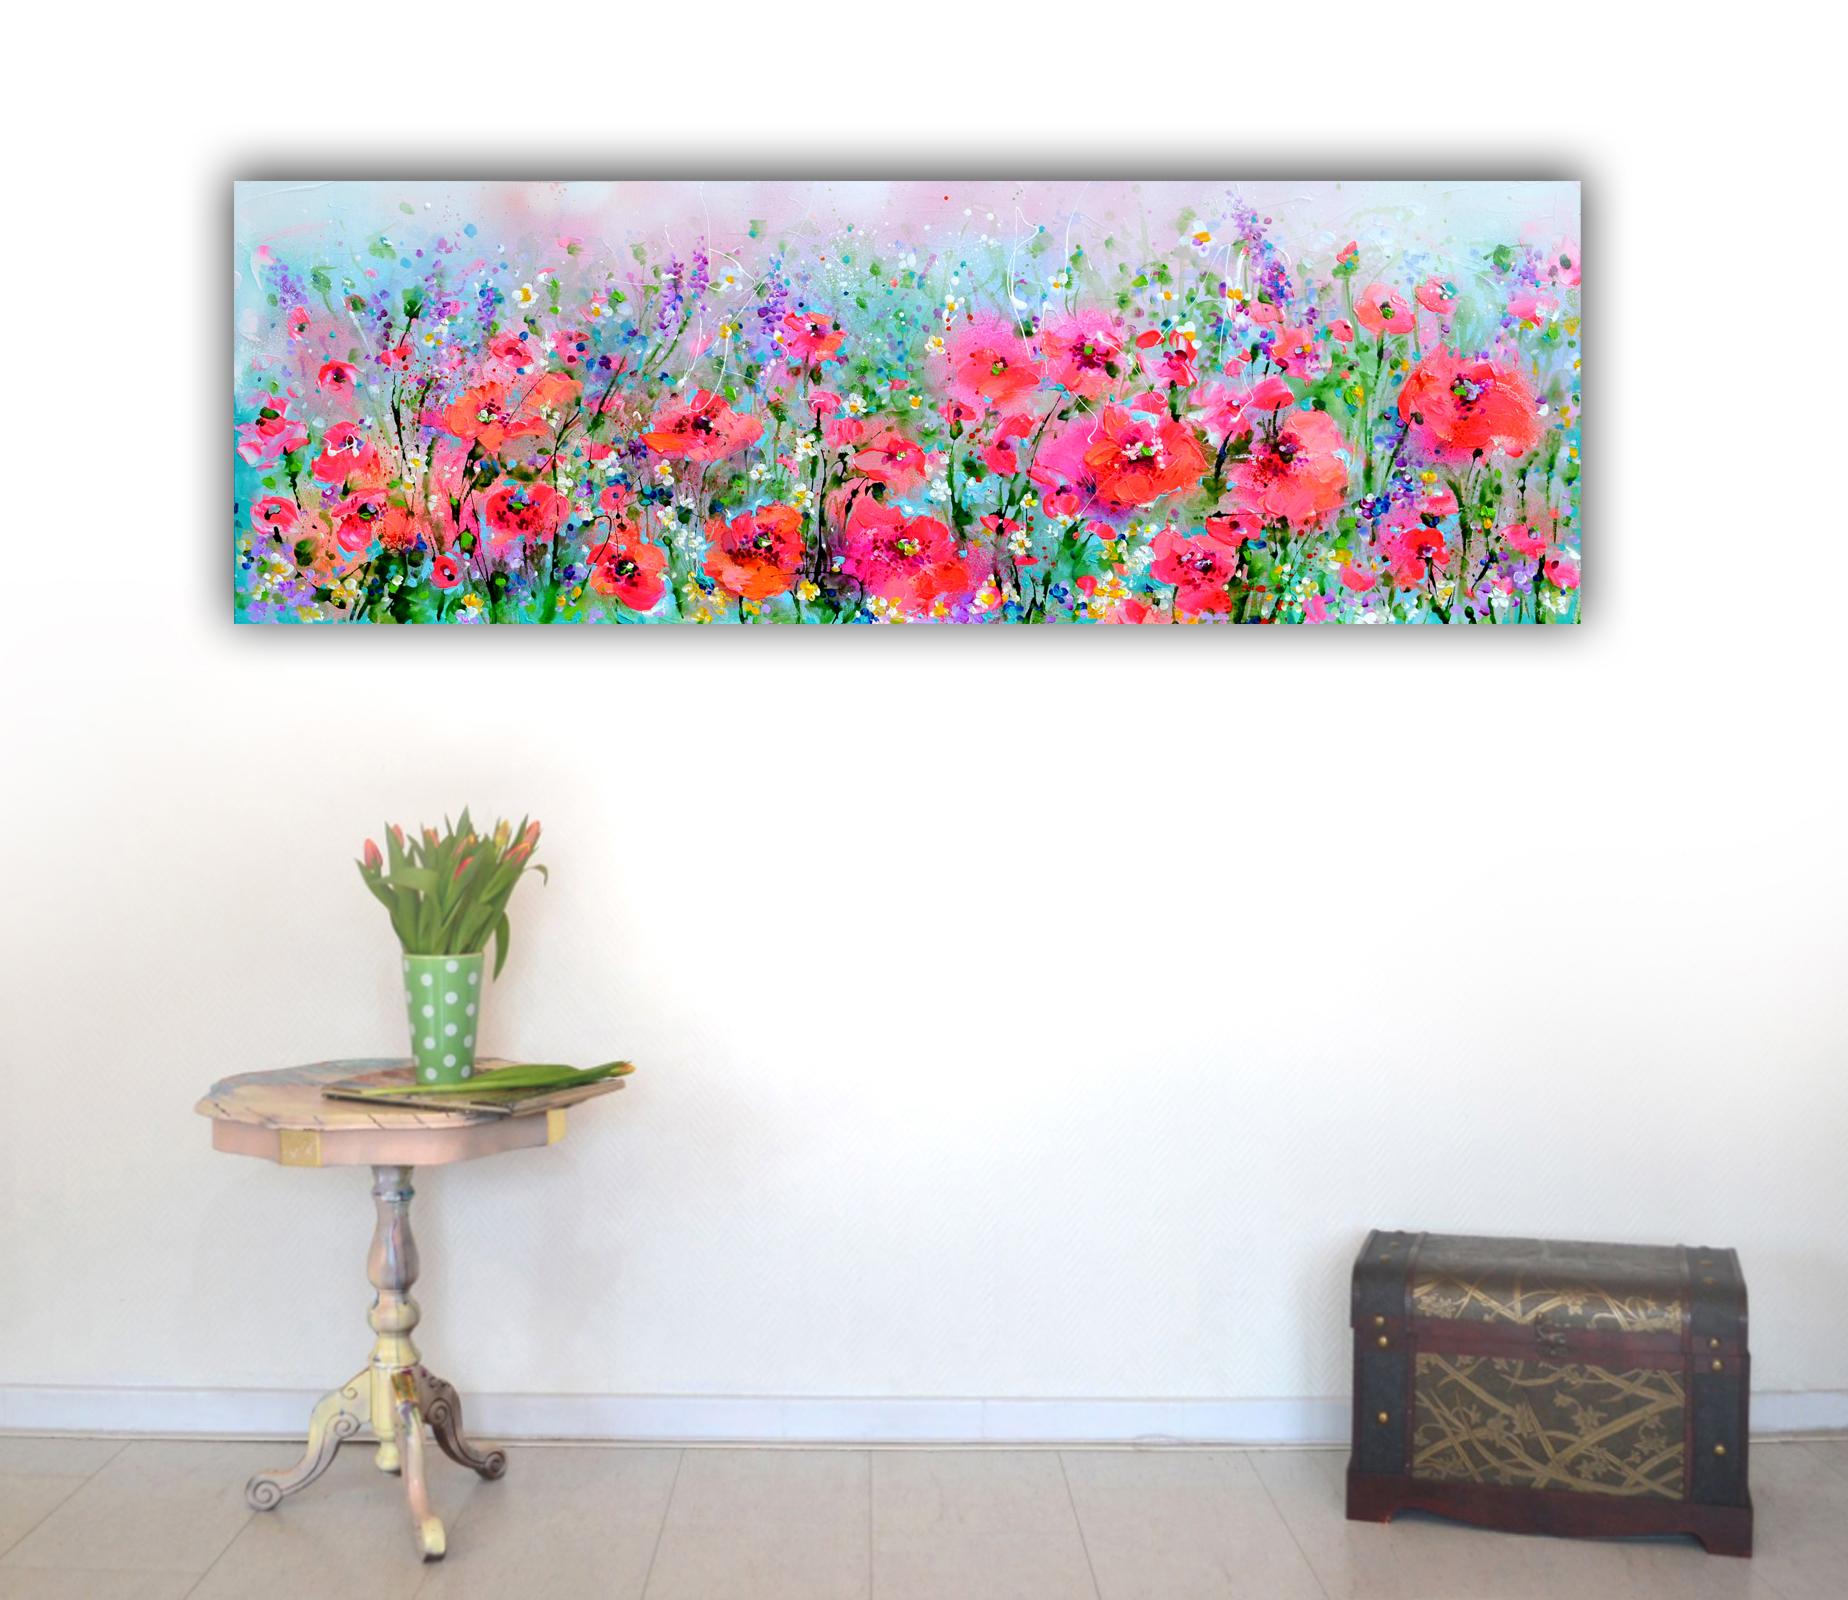 READY TO HANG with the edges painted.
Rich and vibrant flowery sceneries that fulfils Roxana's passion for flowers, fields and gardens, that comes in the second place after painting. Roxana Soos is creating this colorful, contrasted and spontaneous